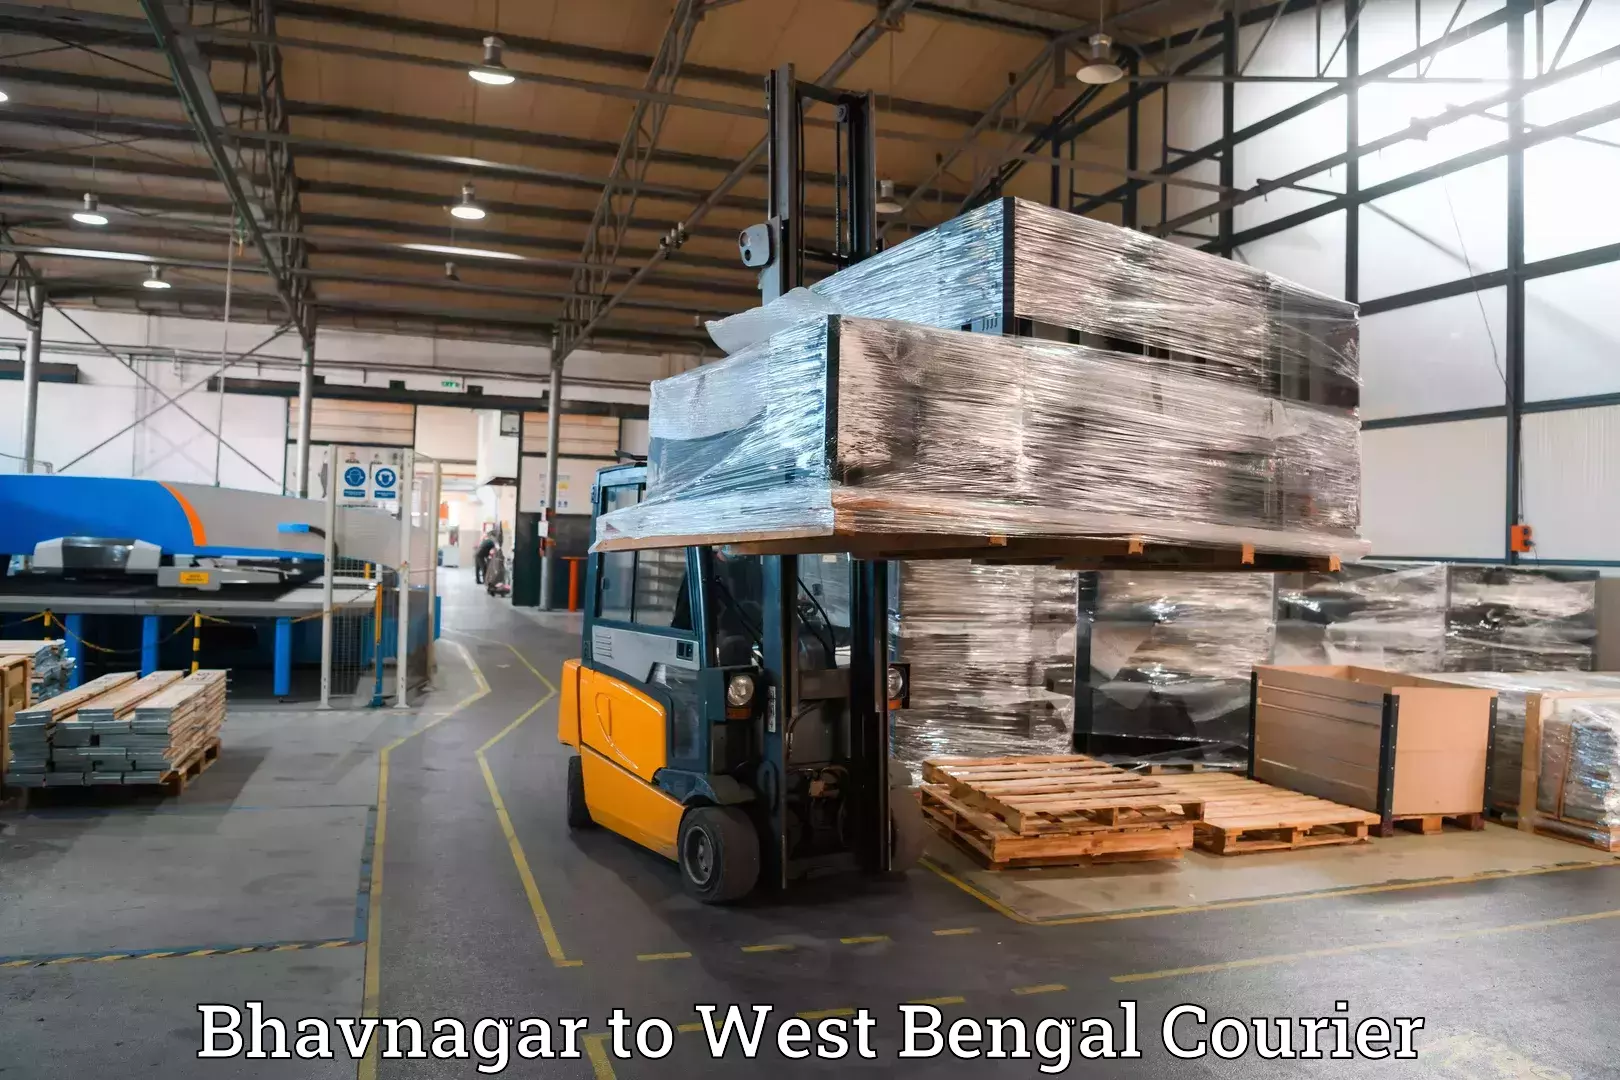 Same day luggage service in Bhavnagar to West Bengal